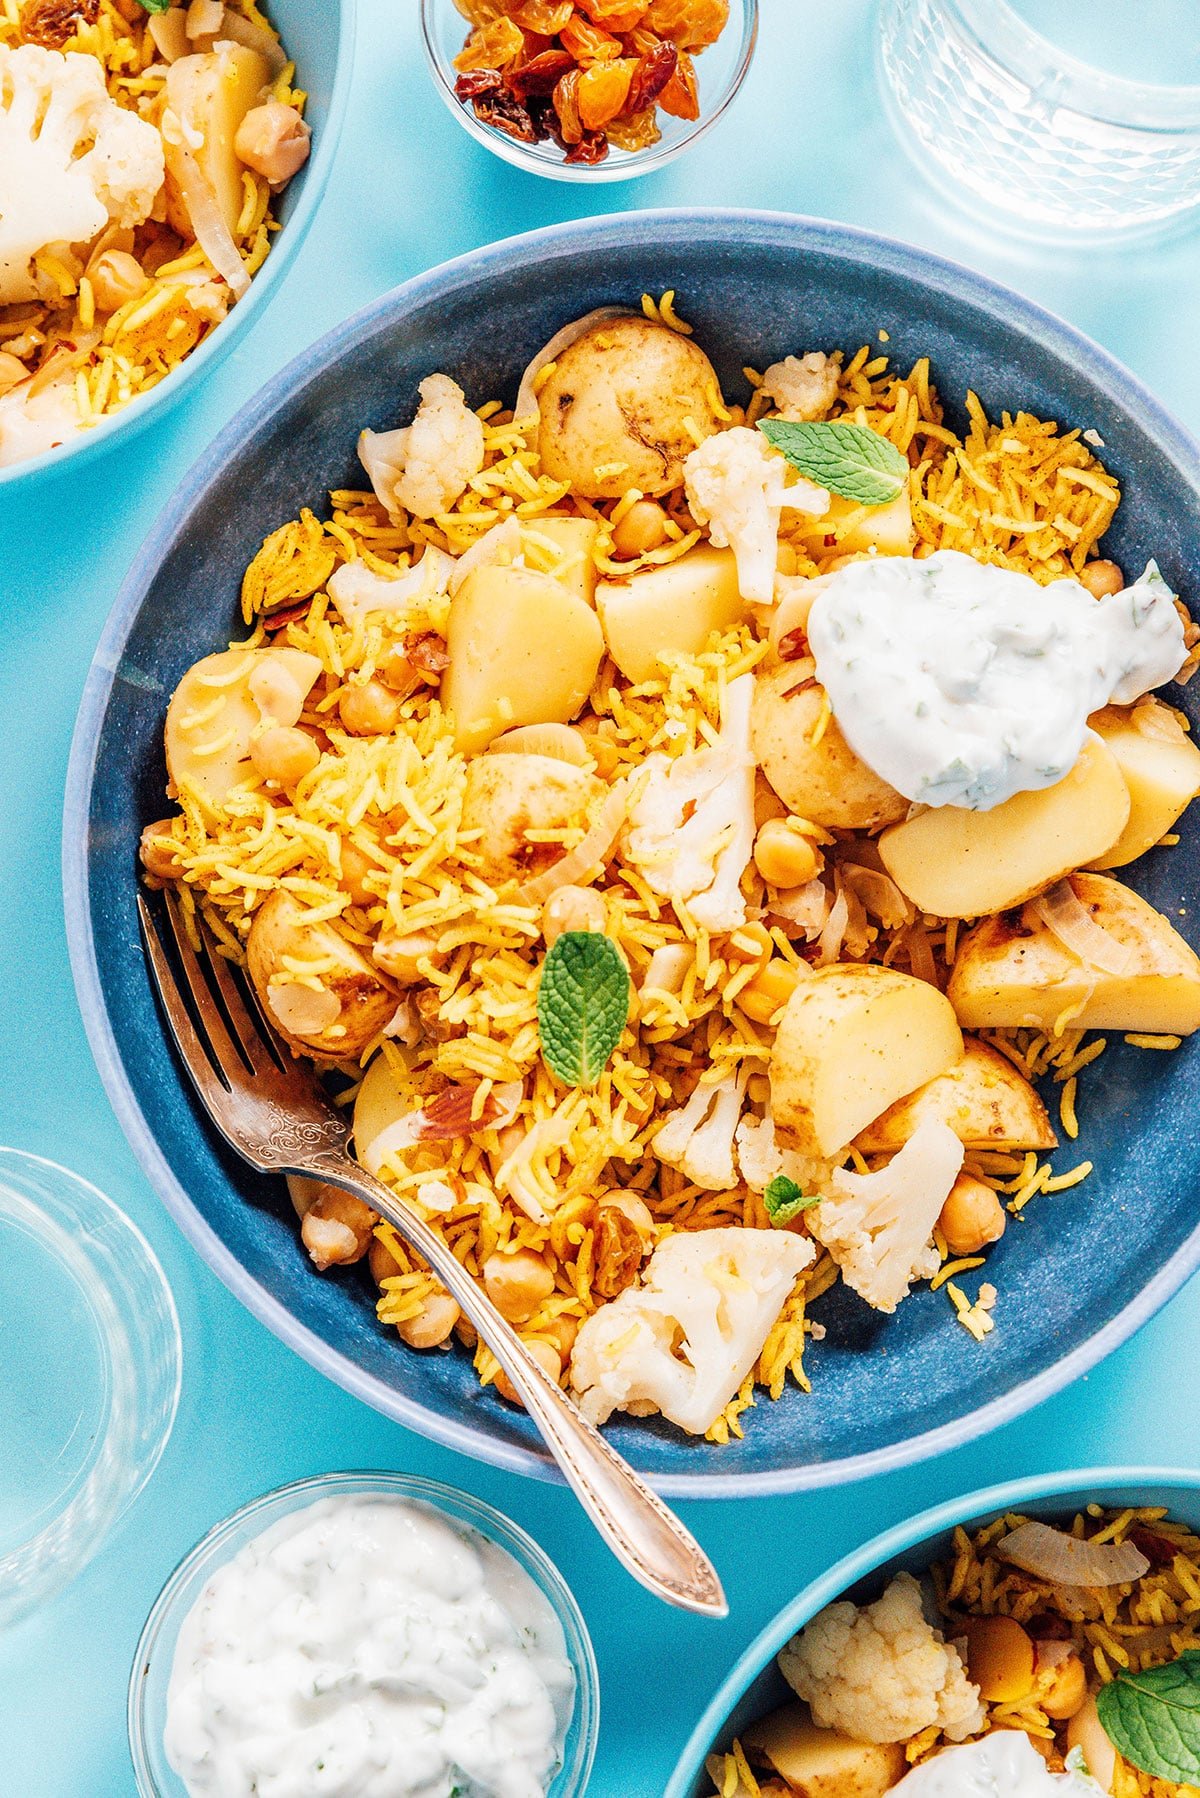 A blue bowl filled with vegetable biryani and topped with minted yogurt